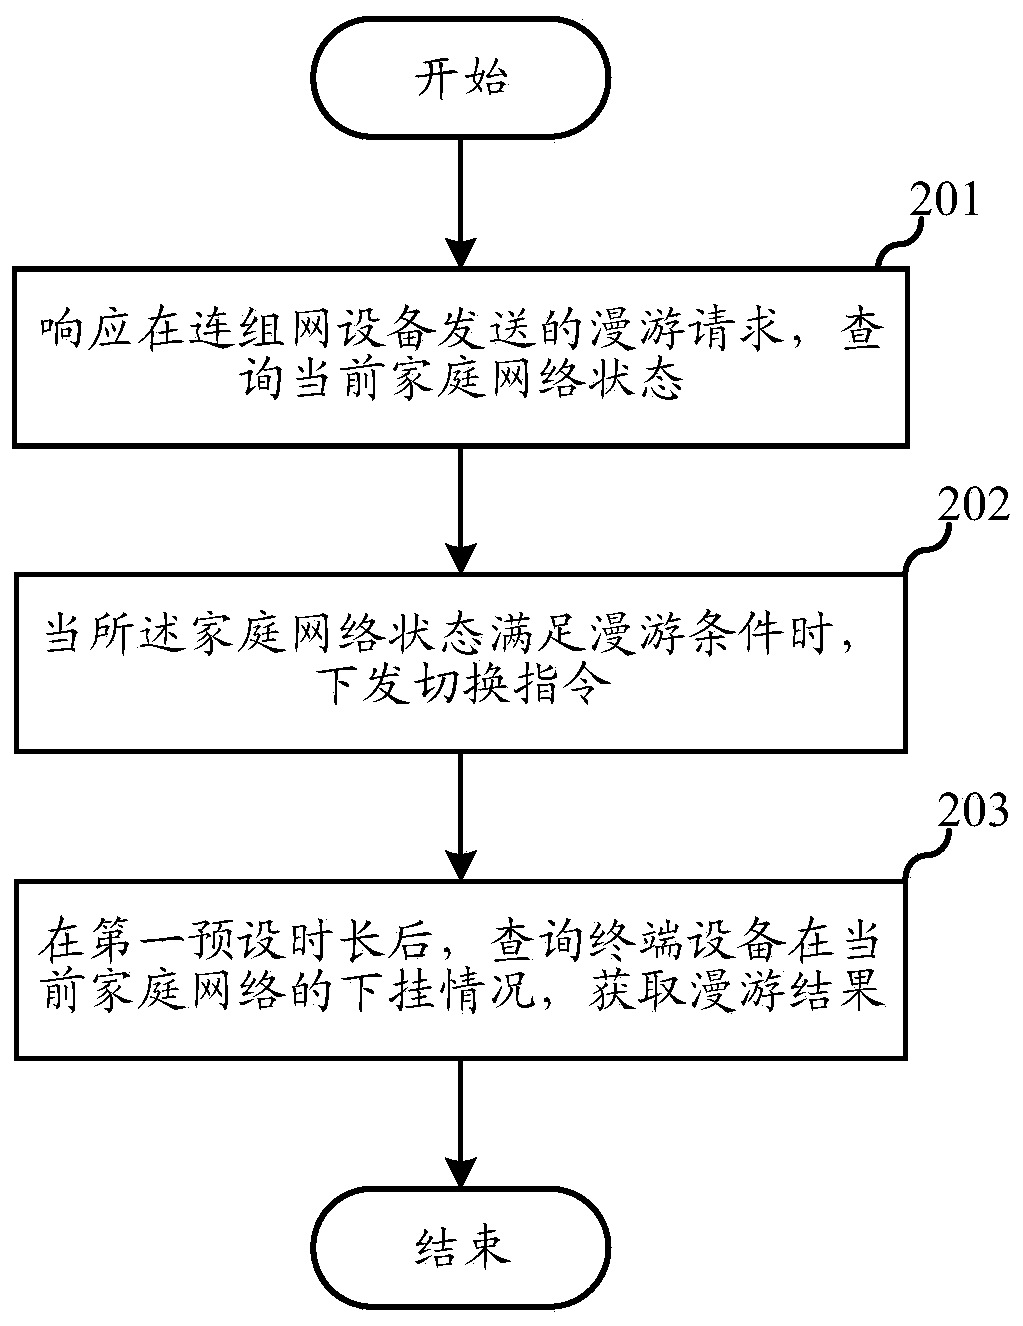 Household wireless roaming method and system, cloud equipment and networking equipment